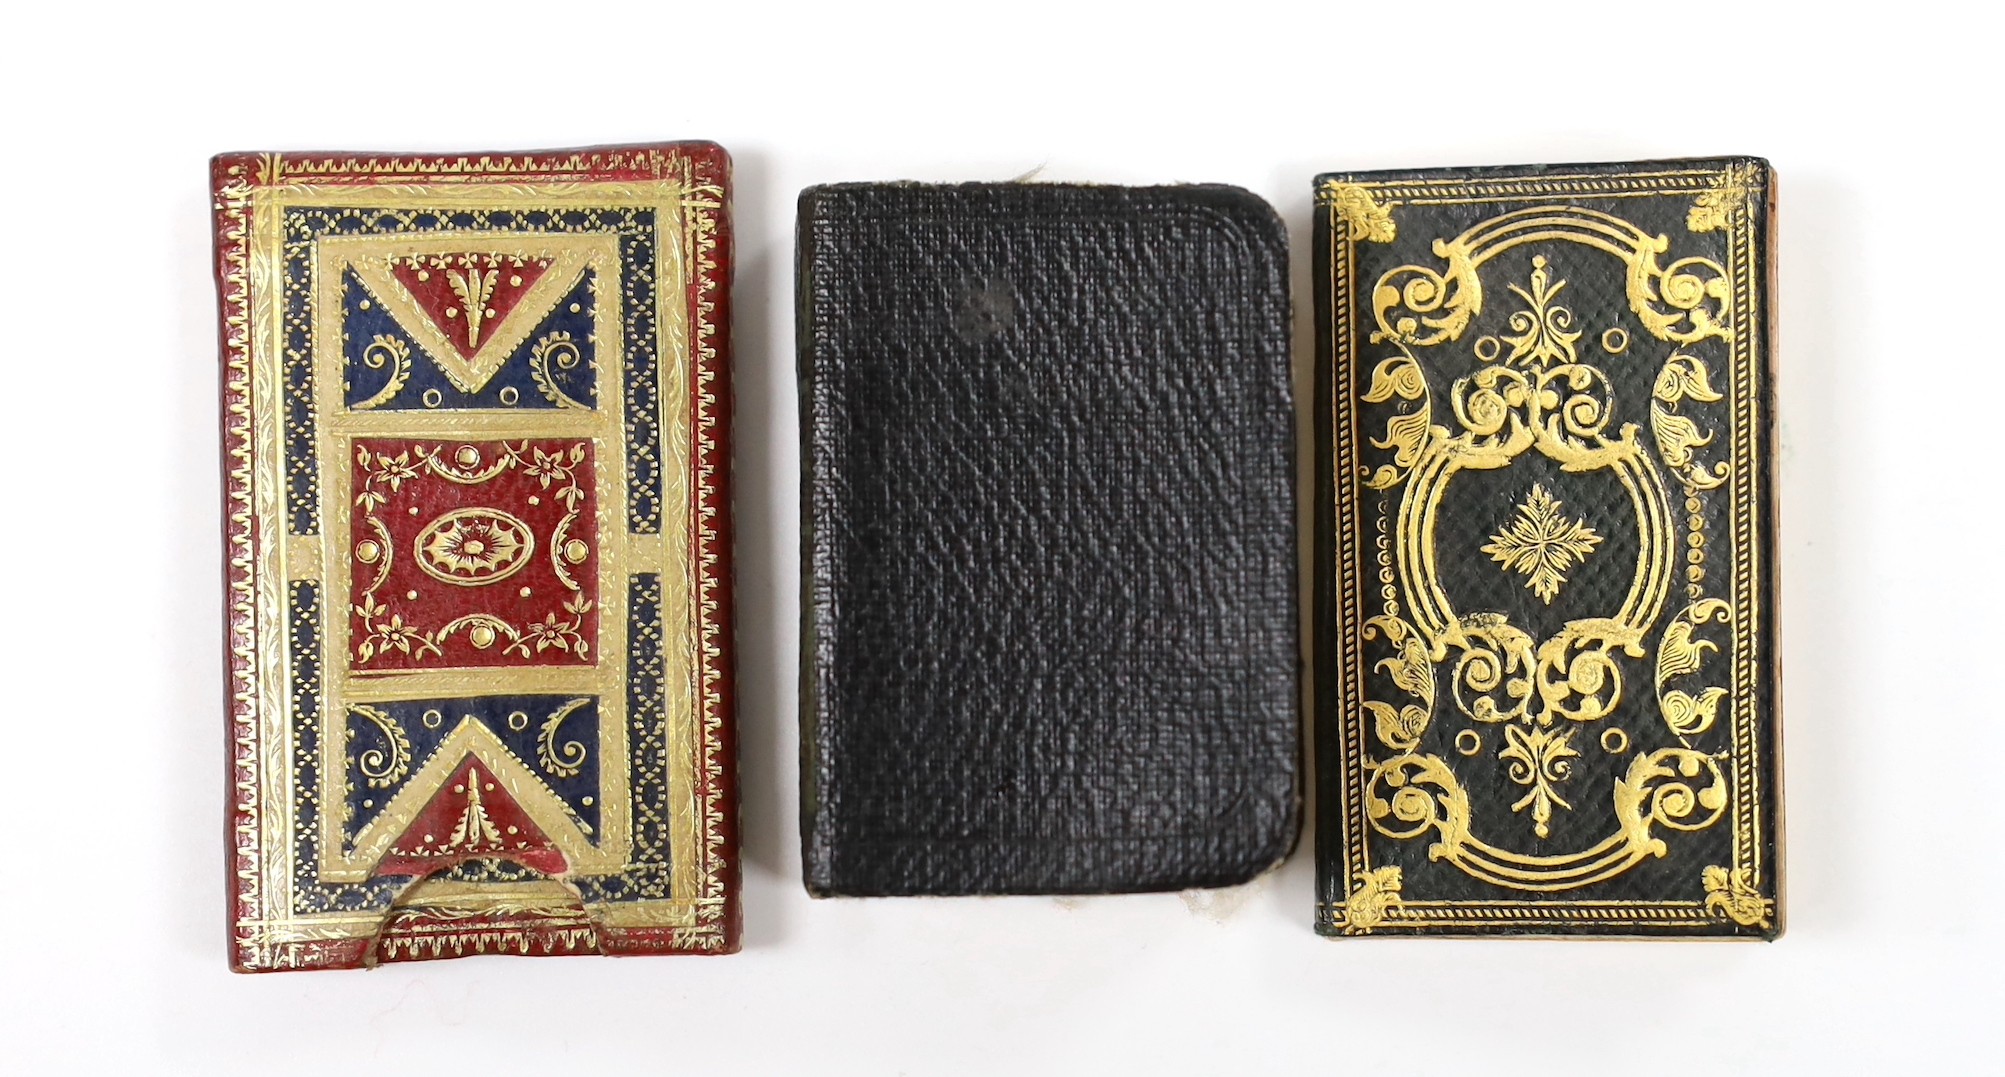 An 18th century miniature book and two others